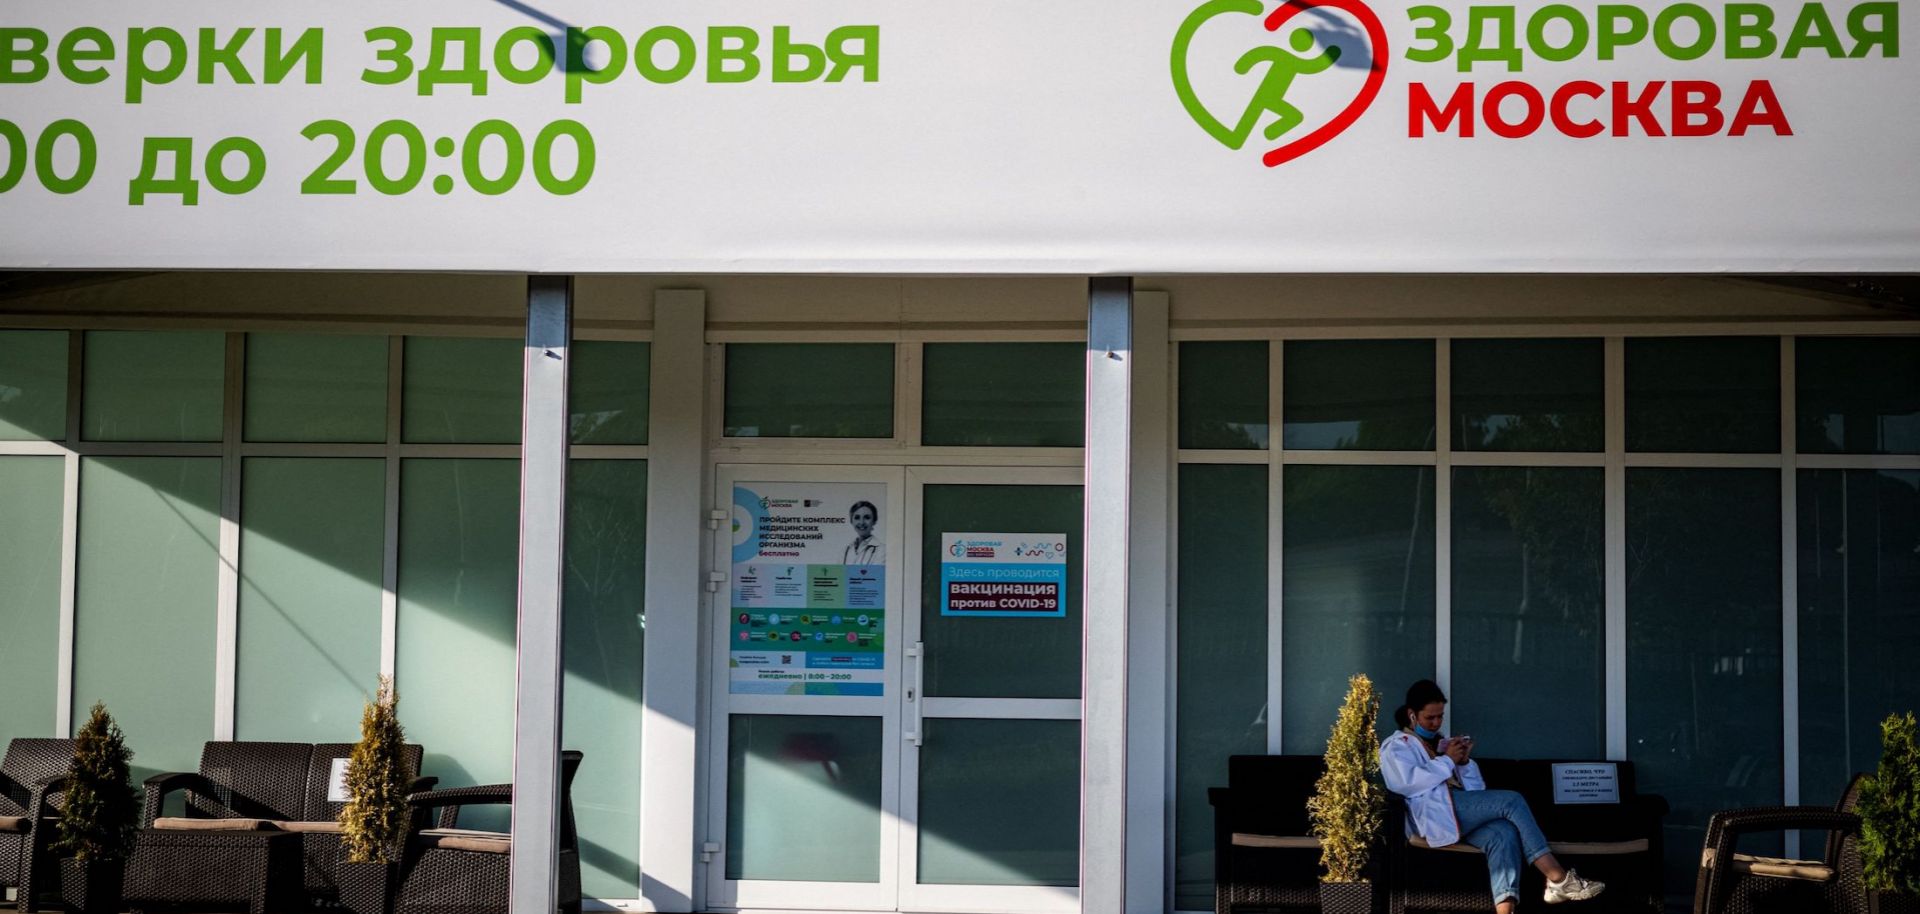 A medic sits in front of a vaccination center in Moscow, Russia, on May 25, 2021.